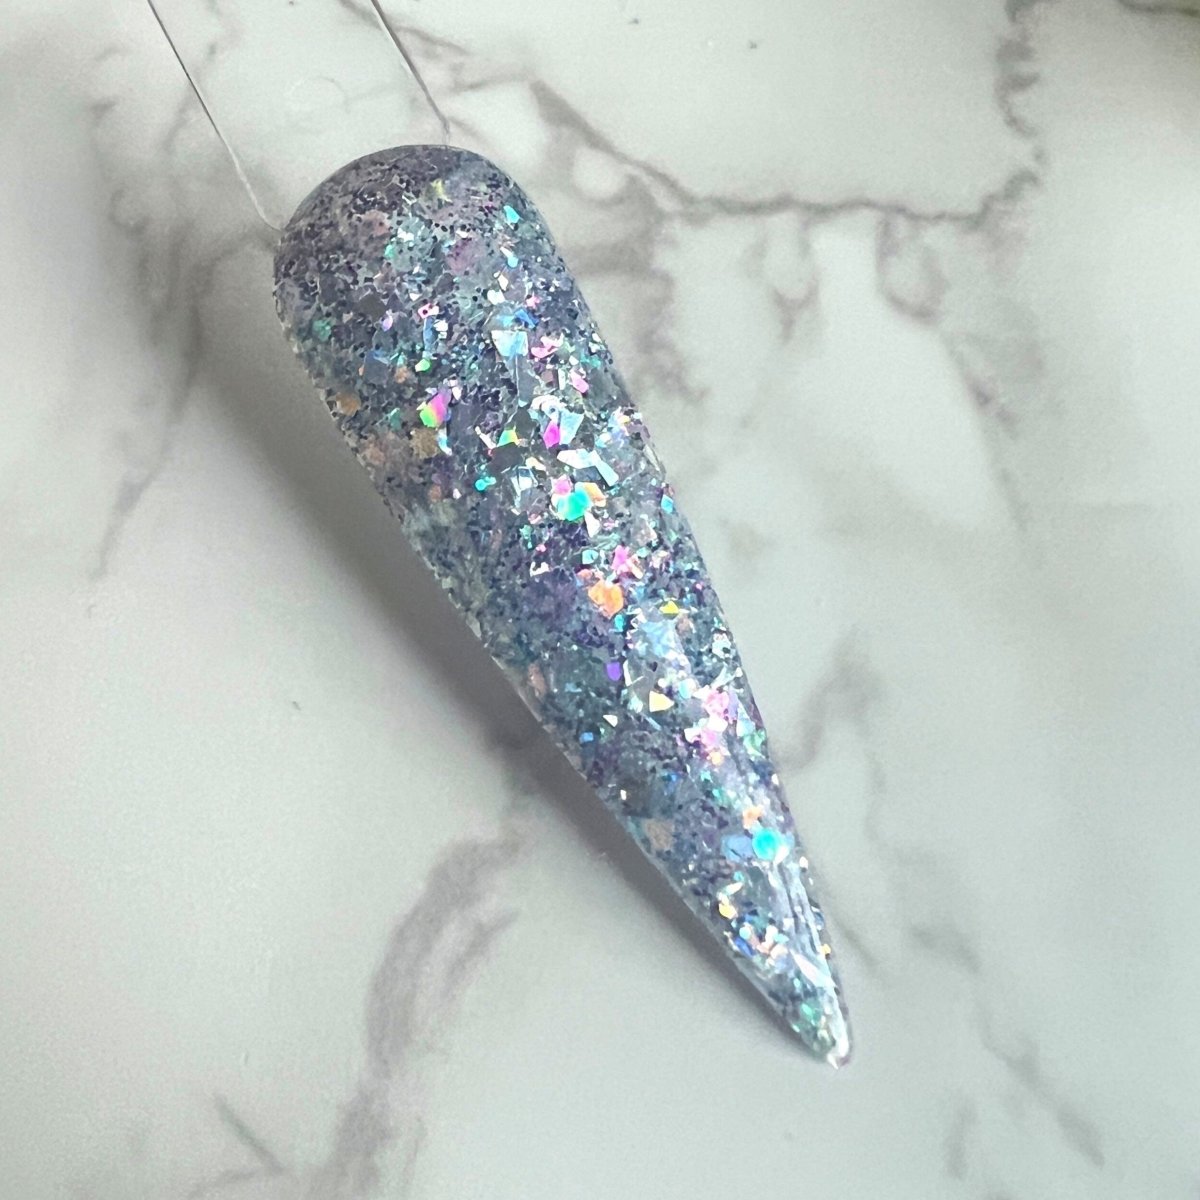 Photo shows swatch of Dipnotic Nails AC22-1 Purple Holographic Glitter Nail Dip Powder Dipnotic Nails 2022 Advent Calendar